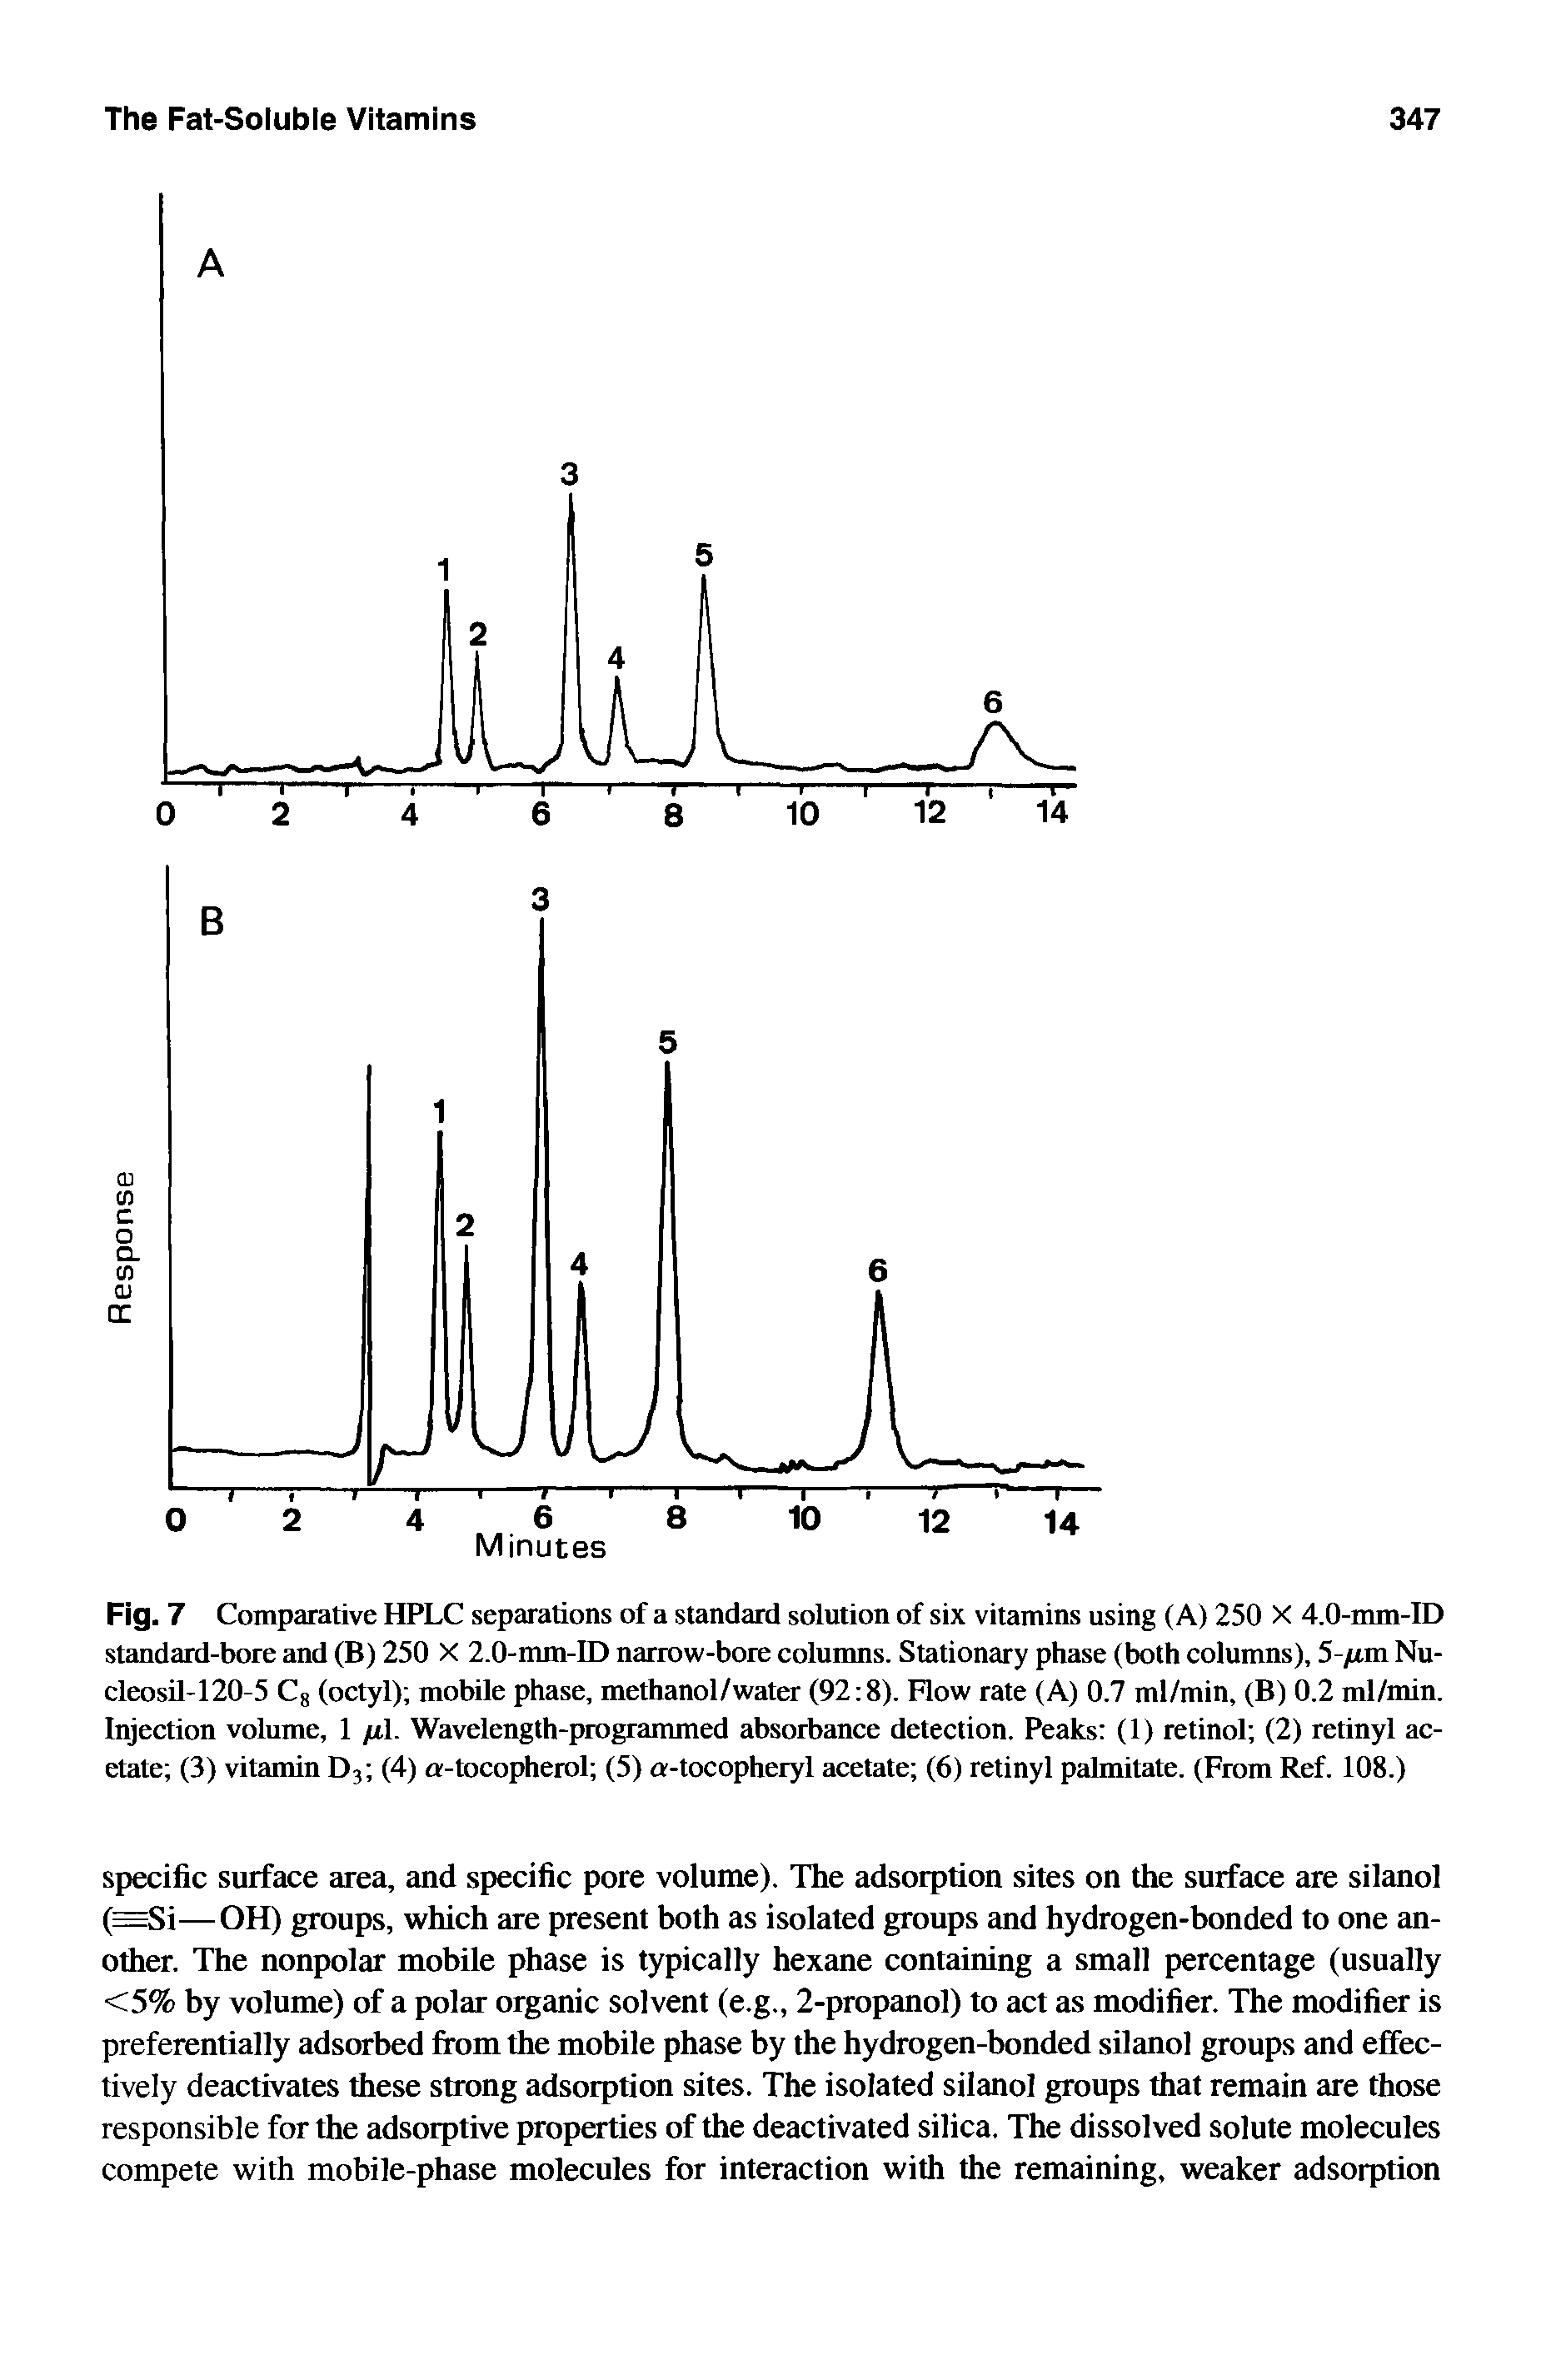 Fig. 7 Comparative HPLC separations of a standard solution of six vitamins using (A) 250 X 4.0-mm-ID standard-bore and (B) 250 X 2.0-mm-ID narrow-bore columns. Stationary phase (both columns), 5-/tm Nu-cleosil-120-5 C8 (octyl) mobile phase, methanol/water (92 8). Flow rate (A) 0.7 ml/min, (B) 0.2 ml/min. Injection volume, 1 fi 1. Wavelength-programmed absorbance detection. Peaks (1) retinol (2) retinyl acetate (3) vitamin D3 (4) a-tocopherol (5) a-tocopheryl acetate (6) retinyl palmitate. (From Ref. 108.)...